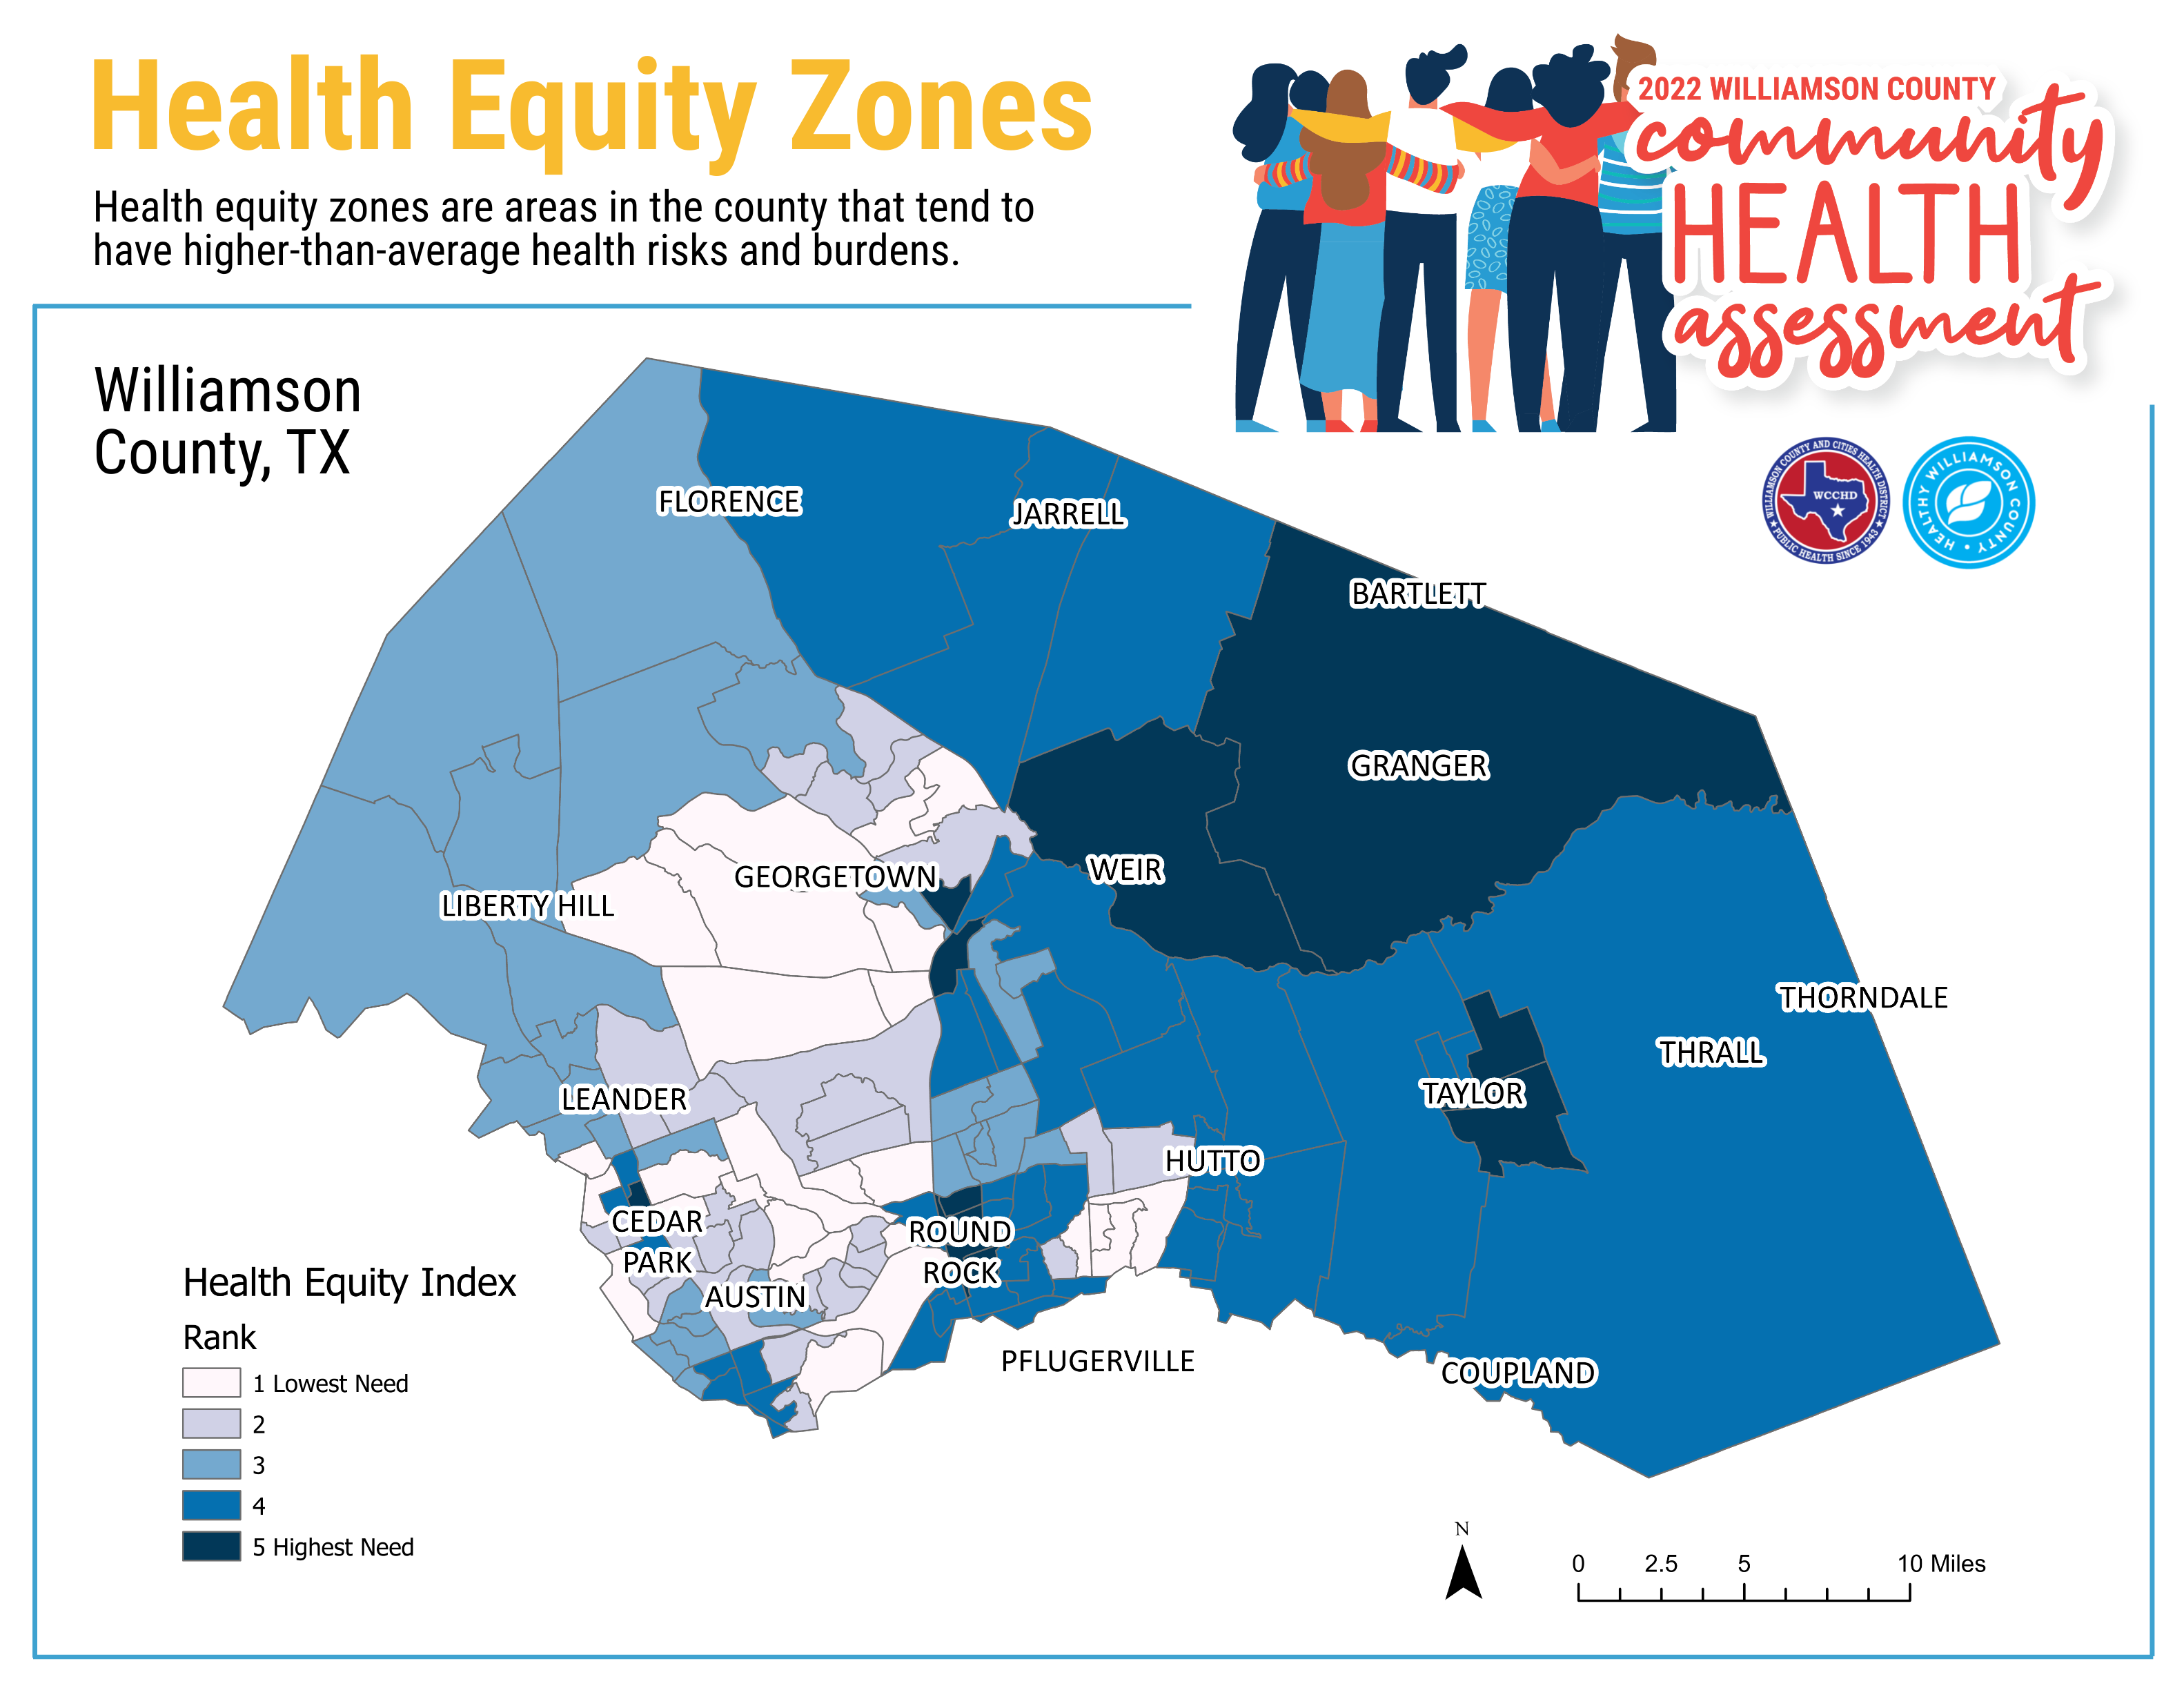 2022 Williamson County Community Health Assessment Health Equity Zones Infographic